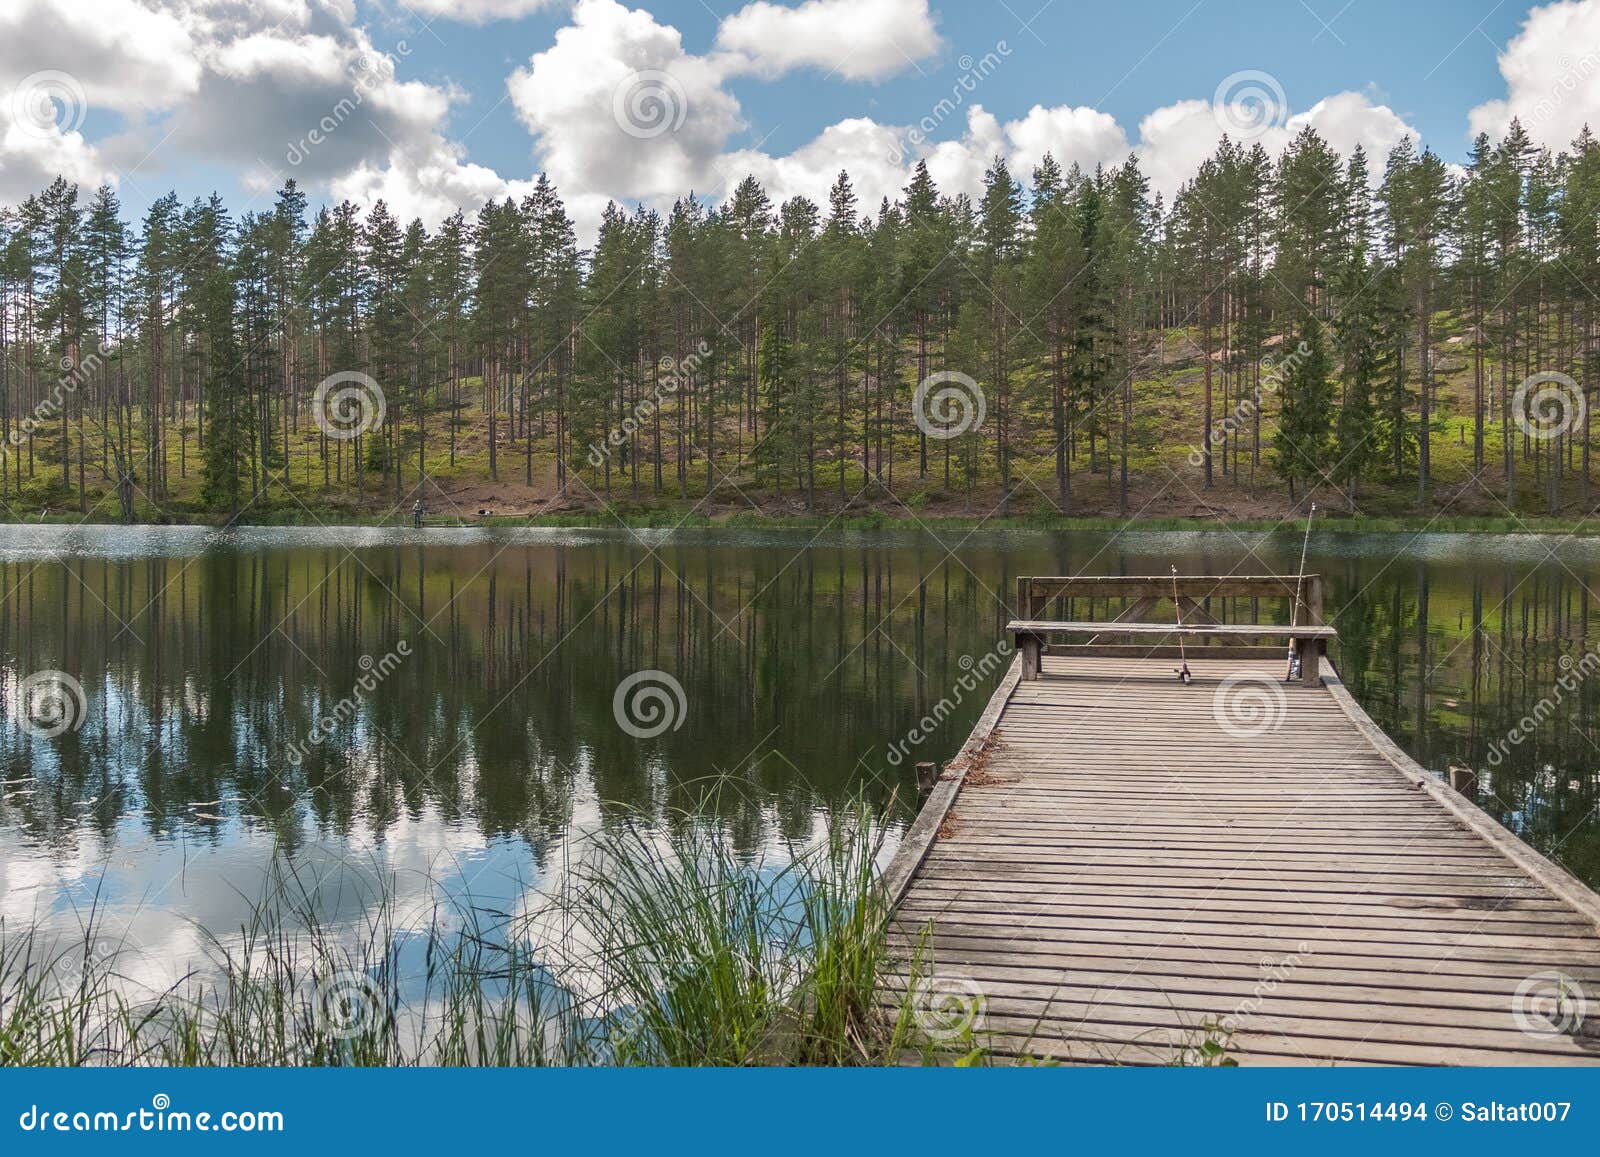 https://thumbs.dreamstime.com/z/fishing-rod-spinning-line-closeup-fishing-rod-fishing-rod-holder-pier-sky-tree-reflection-secluded-170514494.jpg